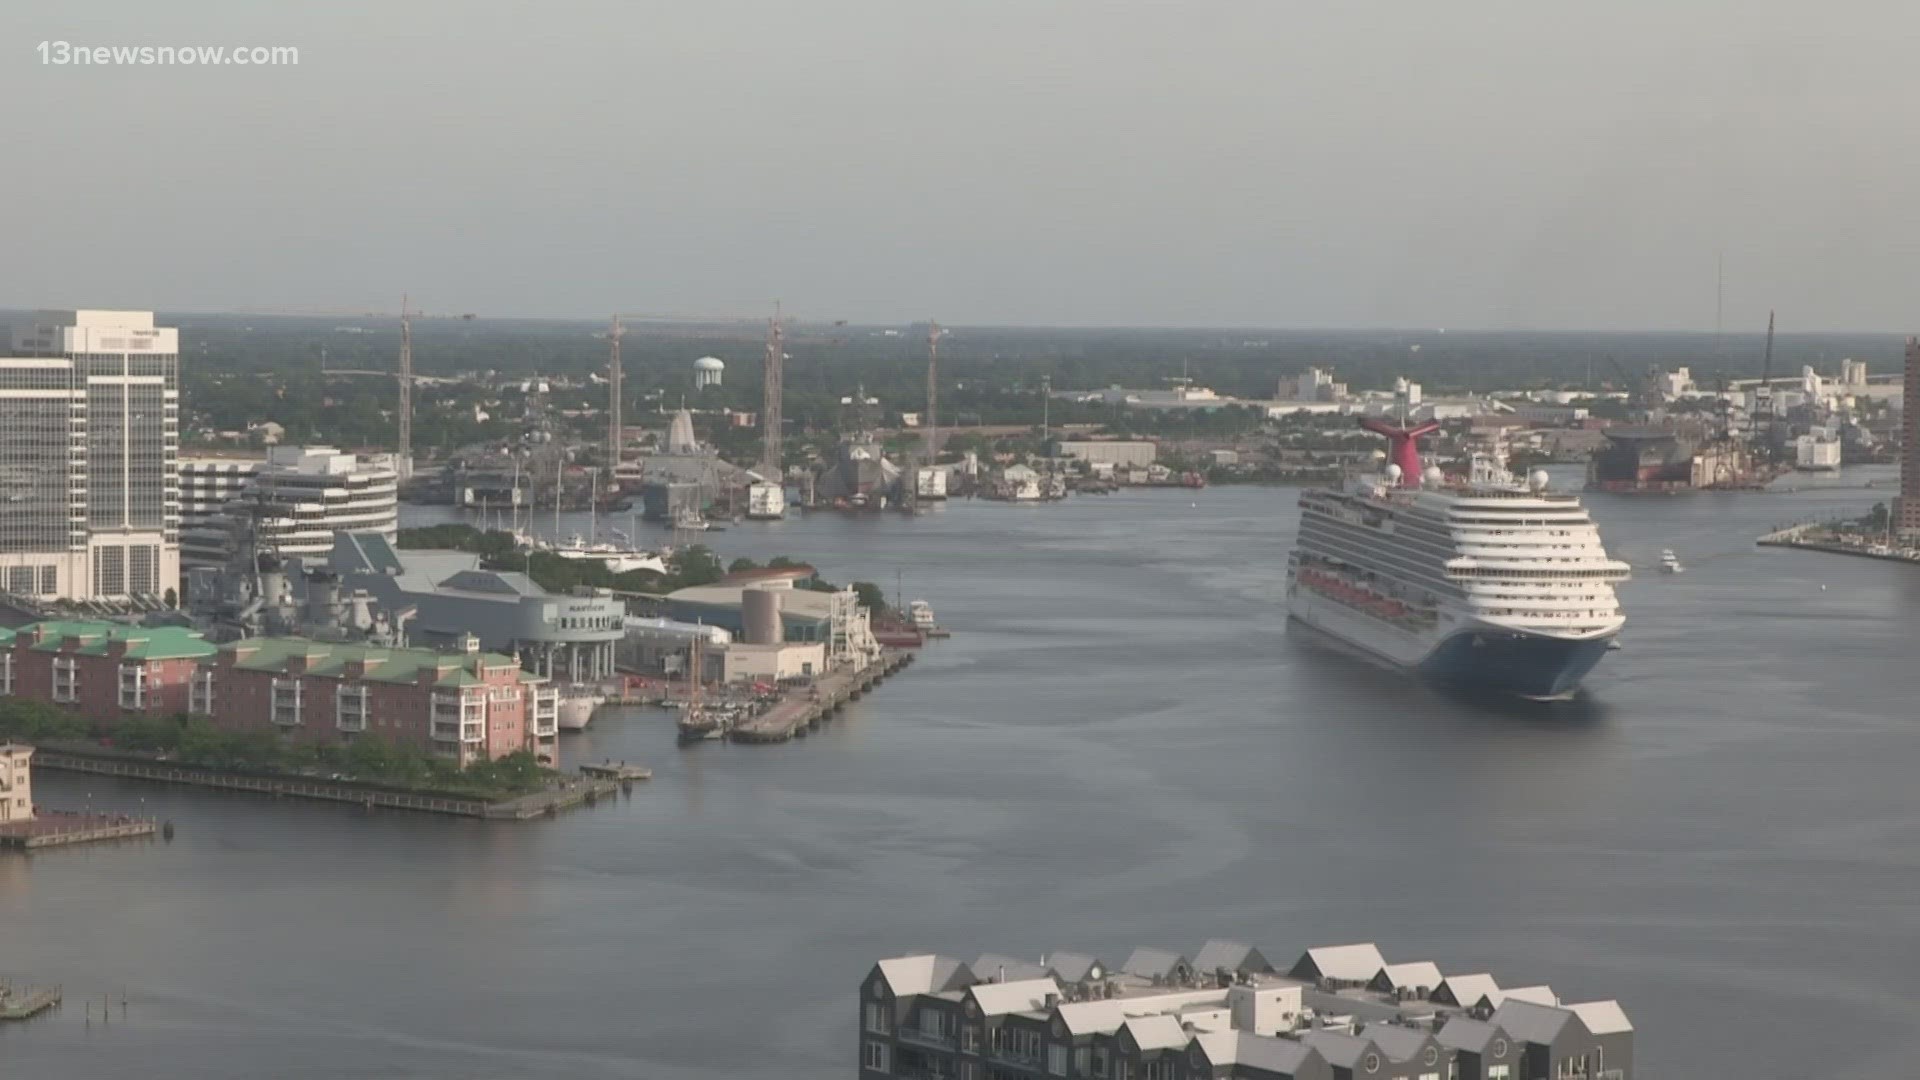 It's easier than ever to sail away on vacation right here in Hampton Roads. Norfolk officials just kicked off the city's busiest cruise season yet.